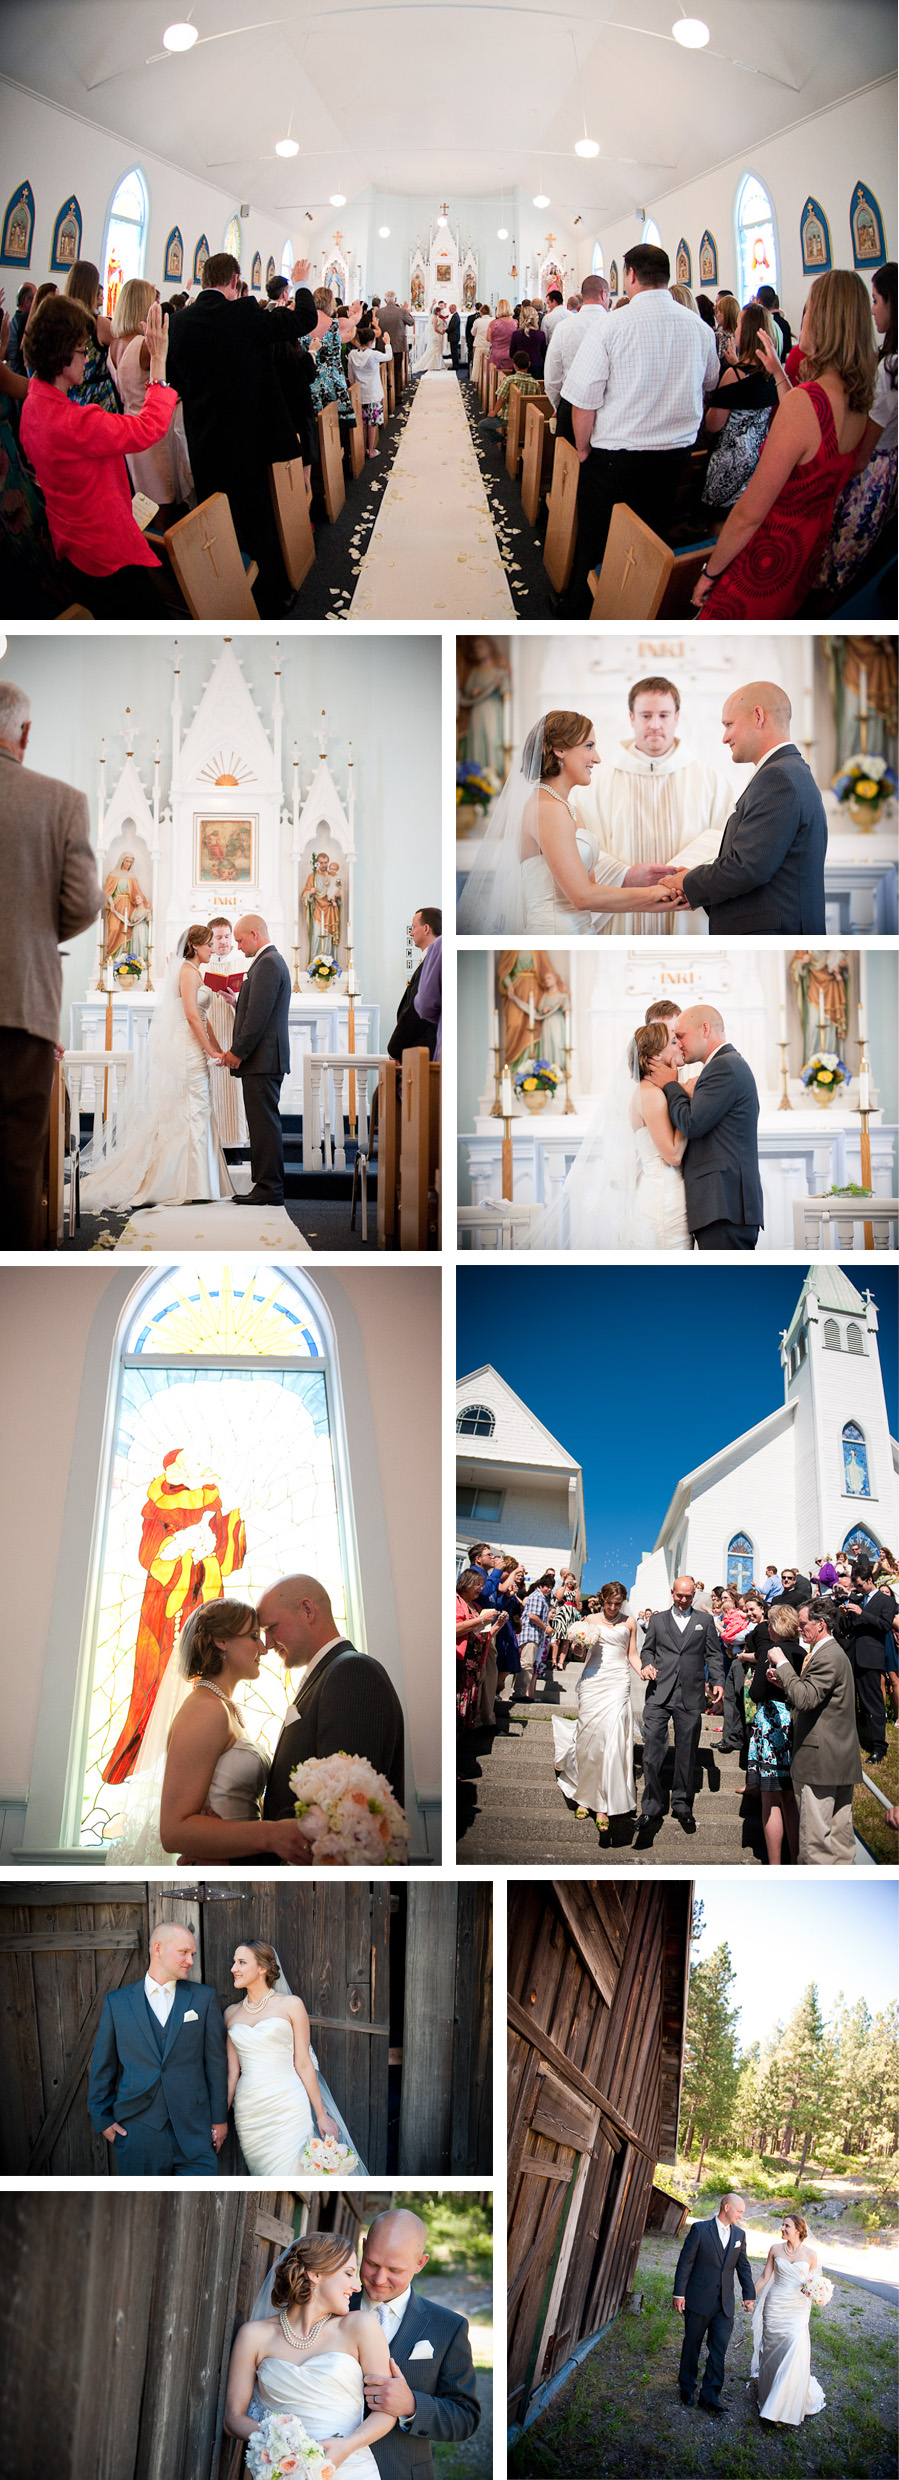 Bride and Groom at wedding Ceremony by Kristen Honeycutt Photographer